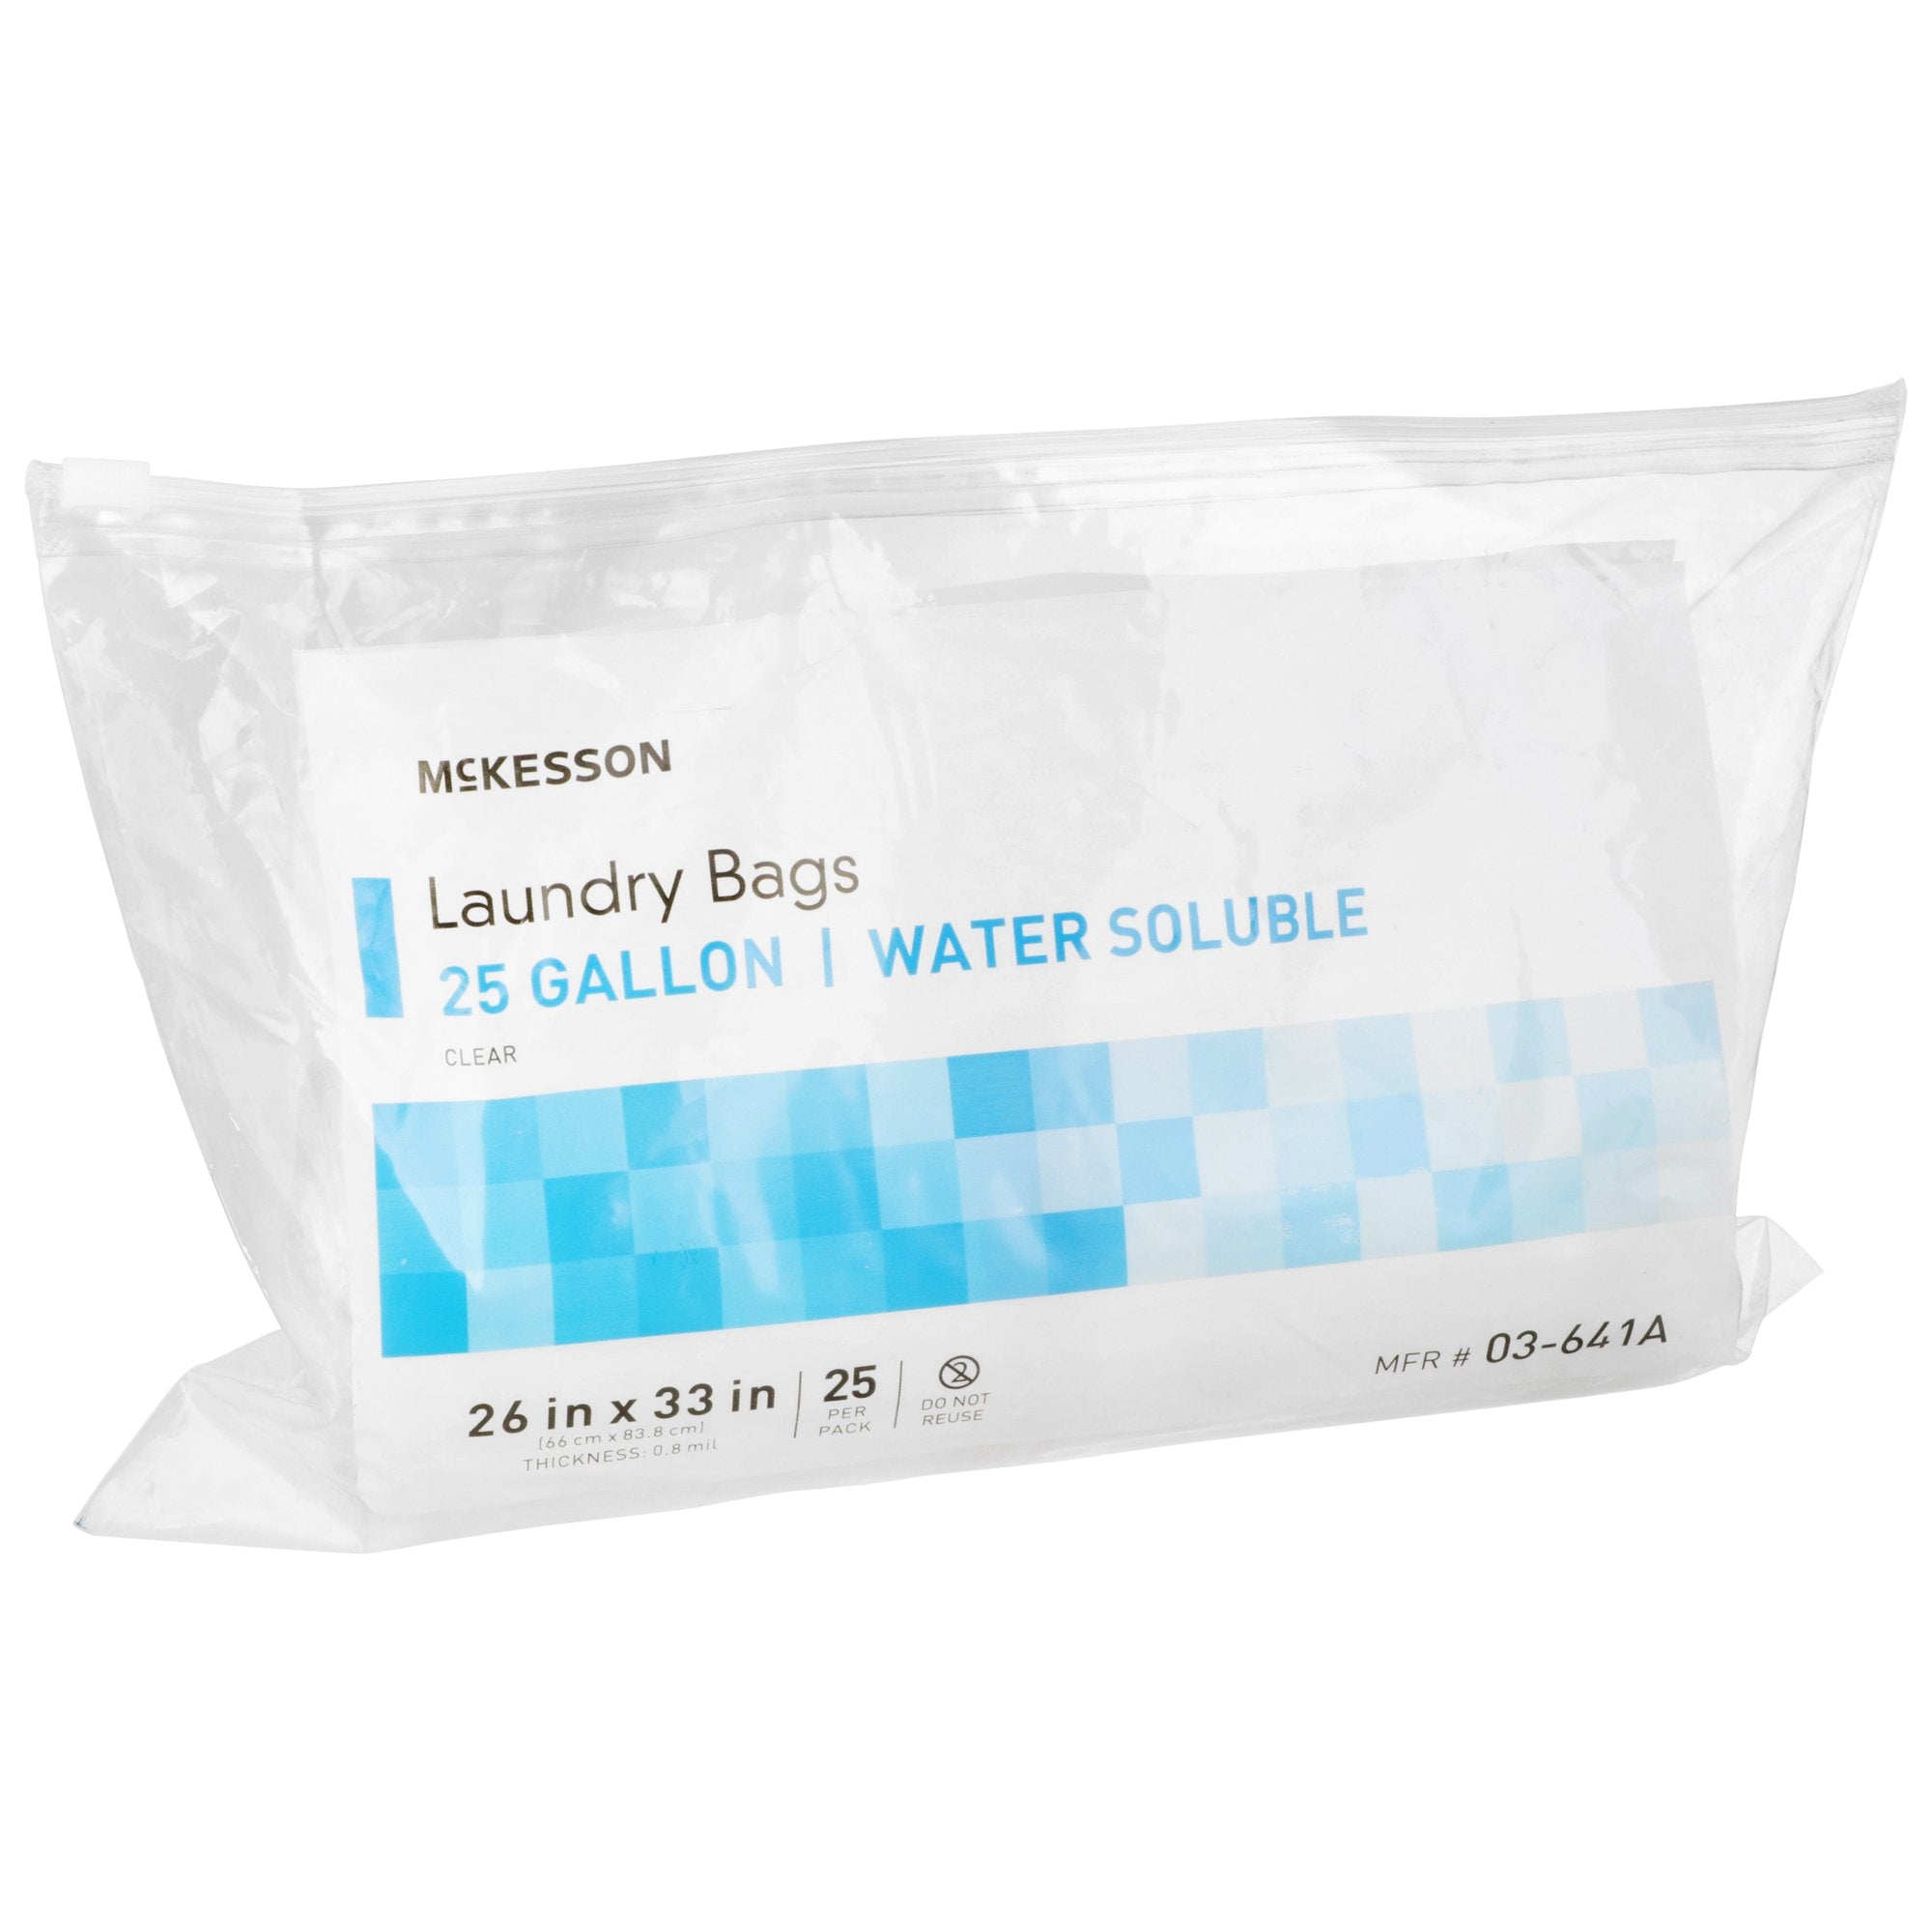 McKesson Water Soluble Laundry Bag, 20-25 gal Capacity (25 Units)